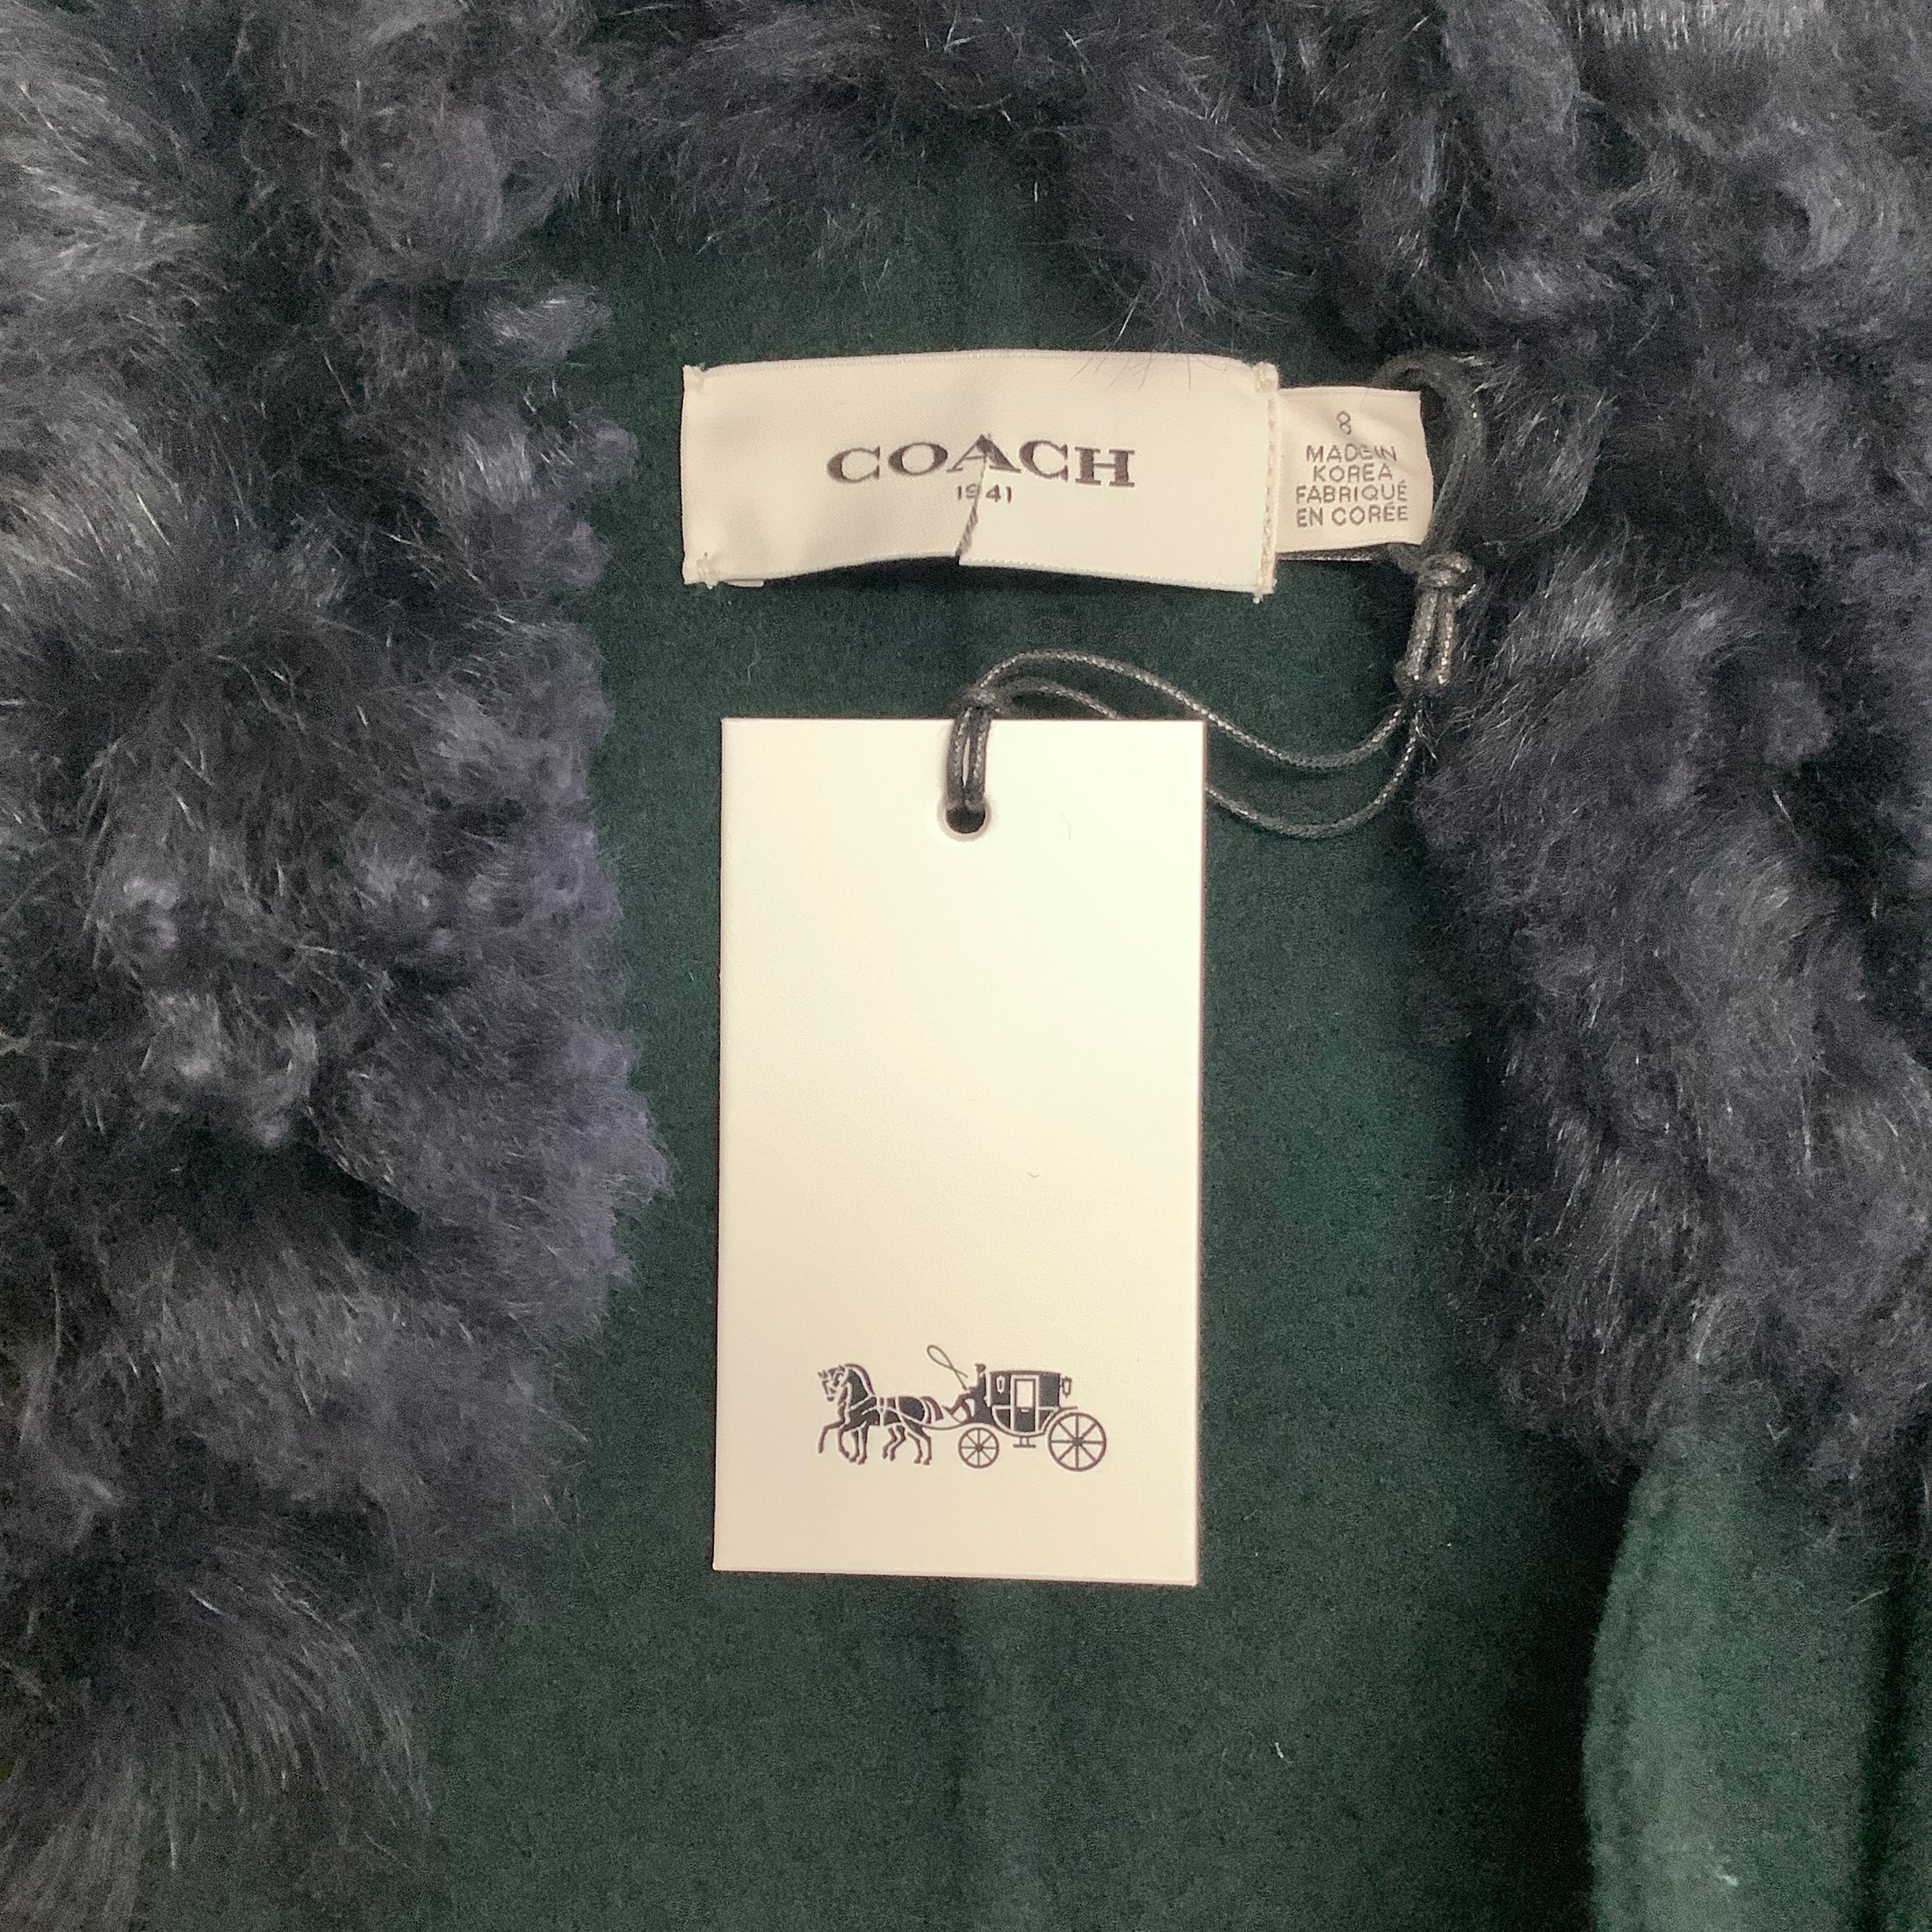 Coach Teal Wool Double Breasted Tie Waist Coat with Removable Navy Shearling Collar